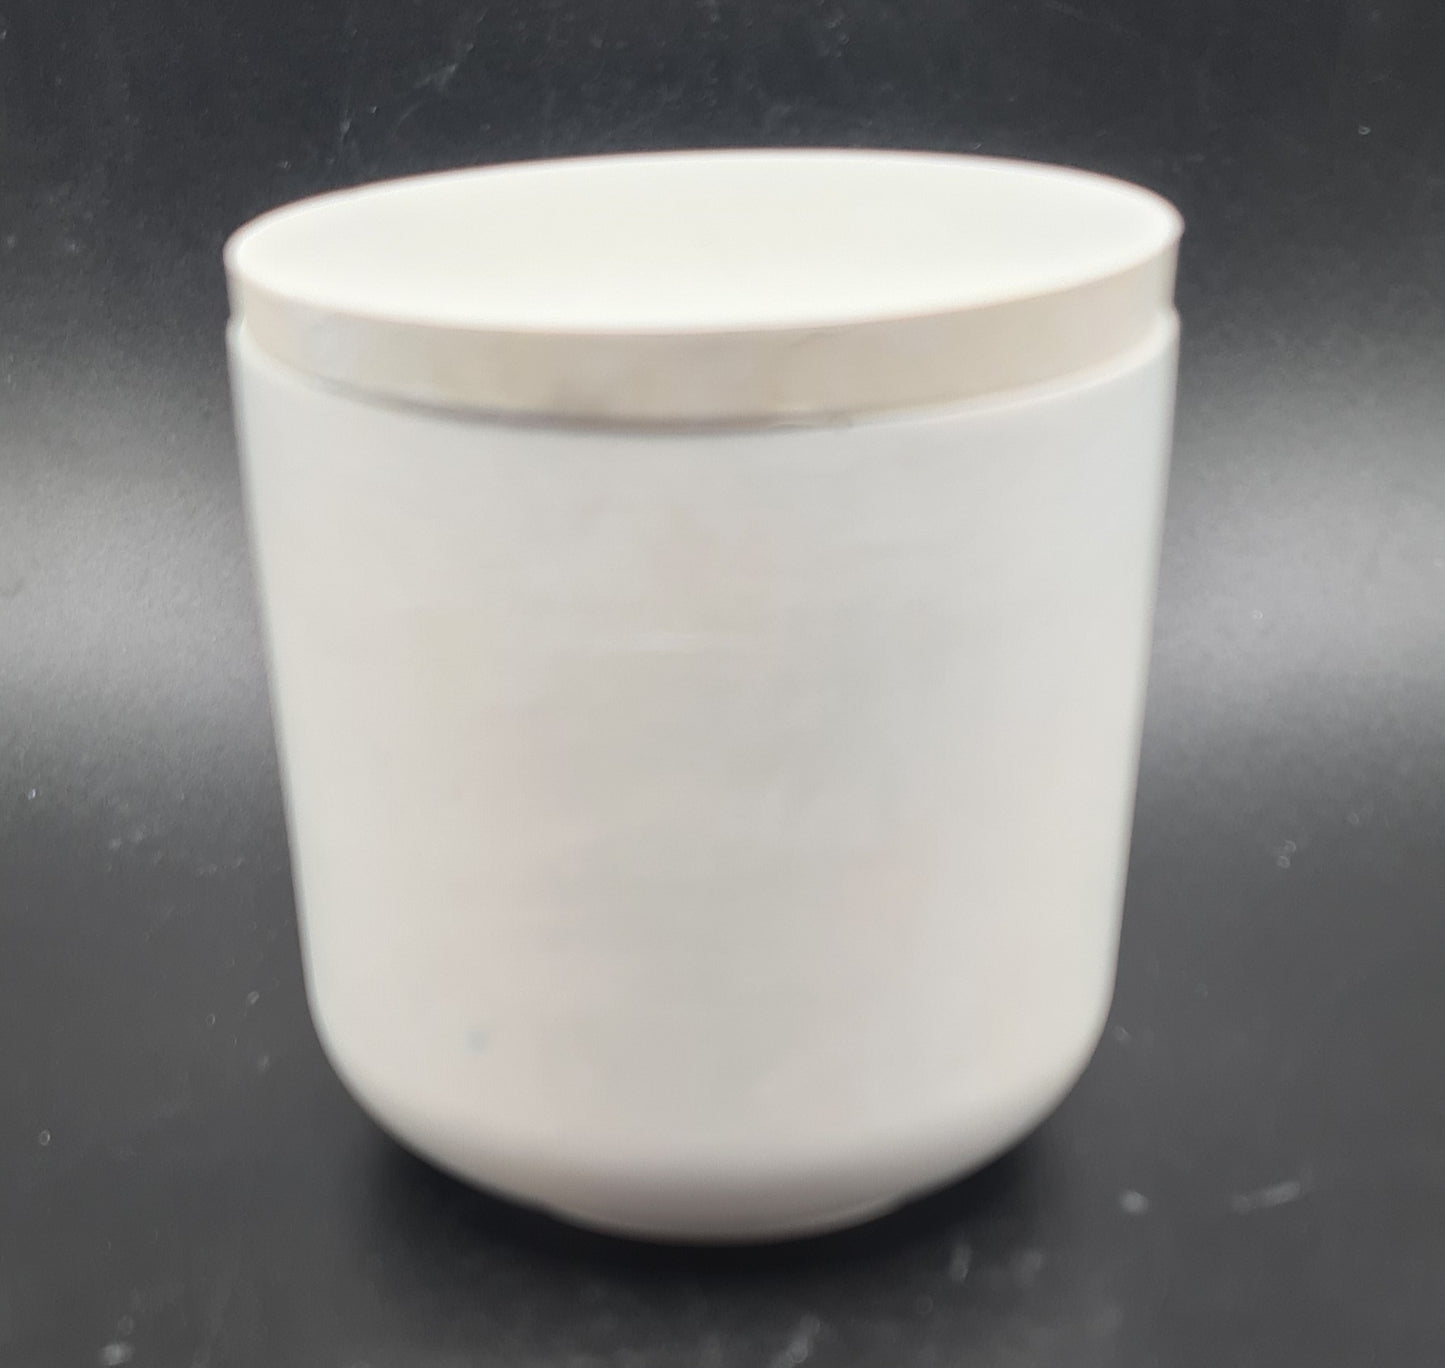 Elegantly designed simple-pot candle, blending beauty with simplicity.